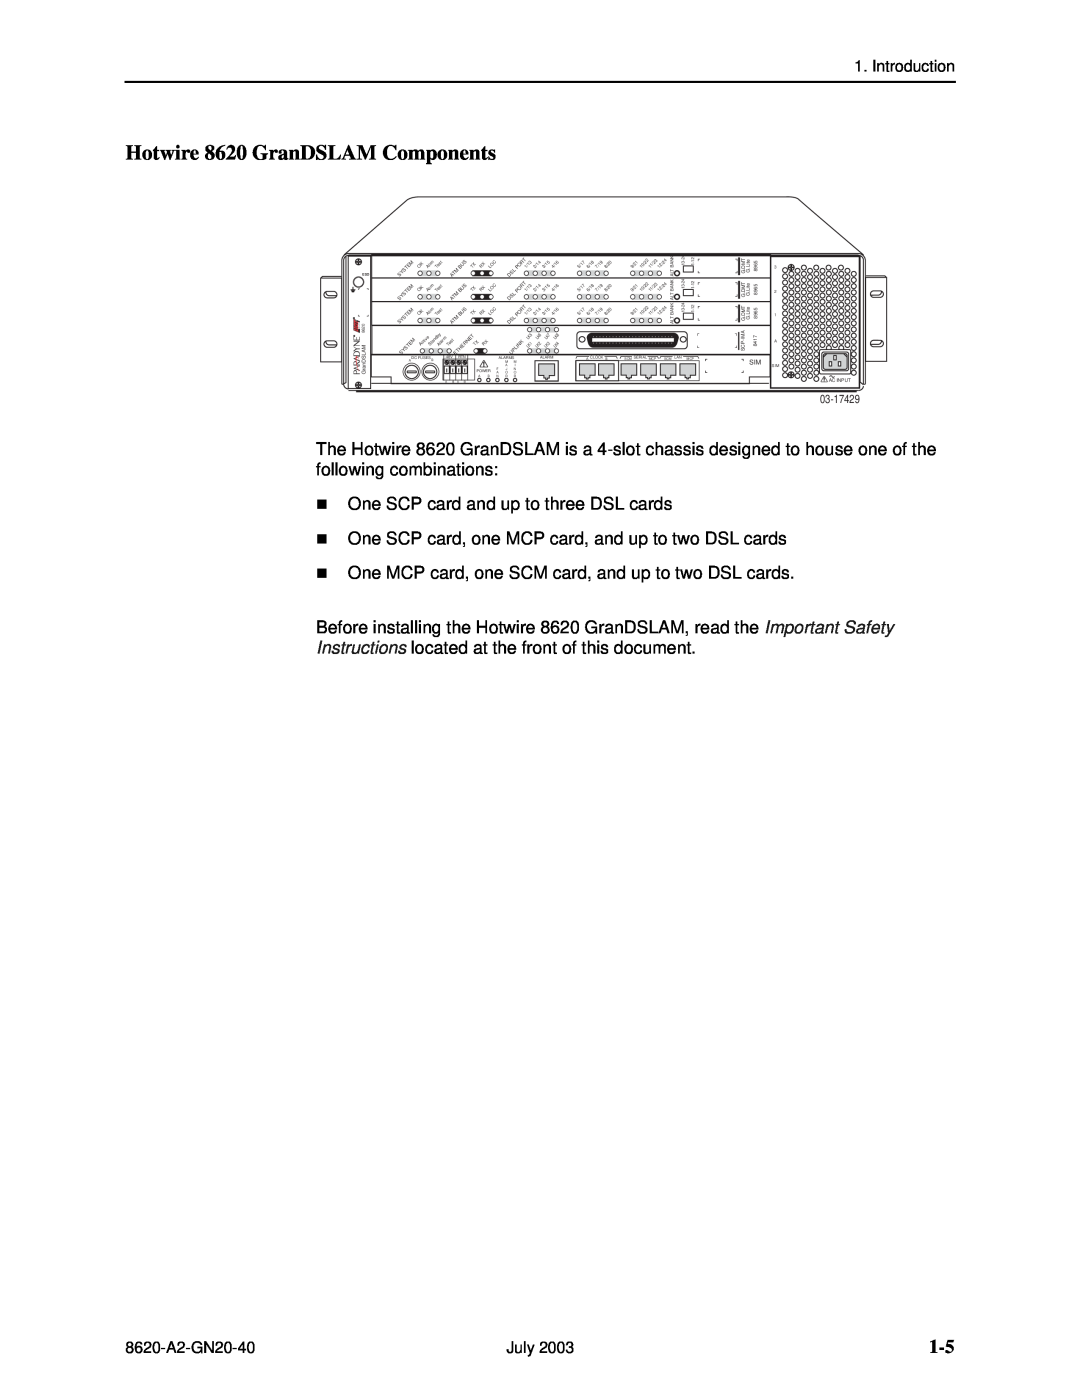 Paradyne Hotwire 8620 GranDSLAM Installation Guide manual Hotwire 8620 GranDSLAM Components 